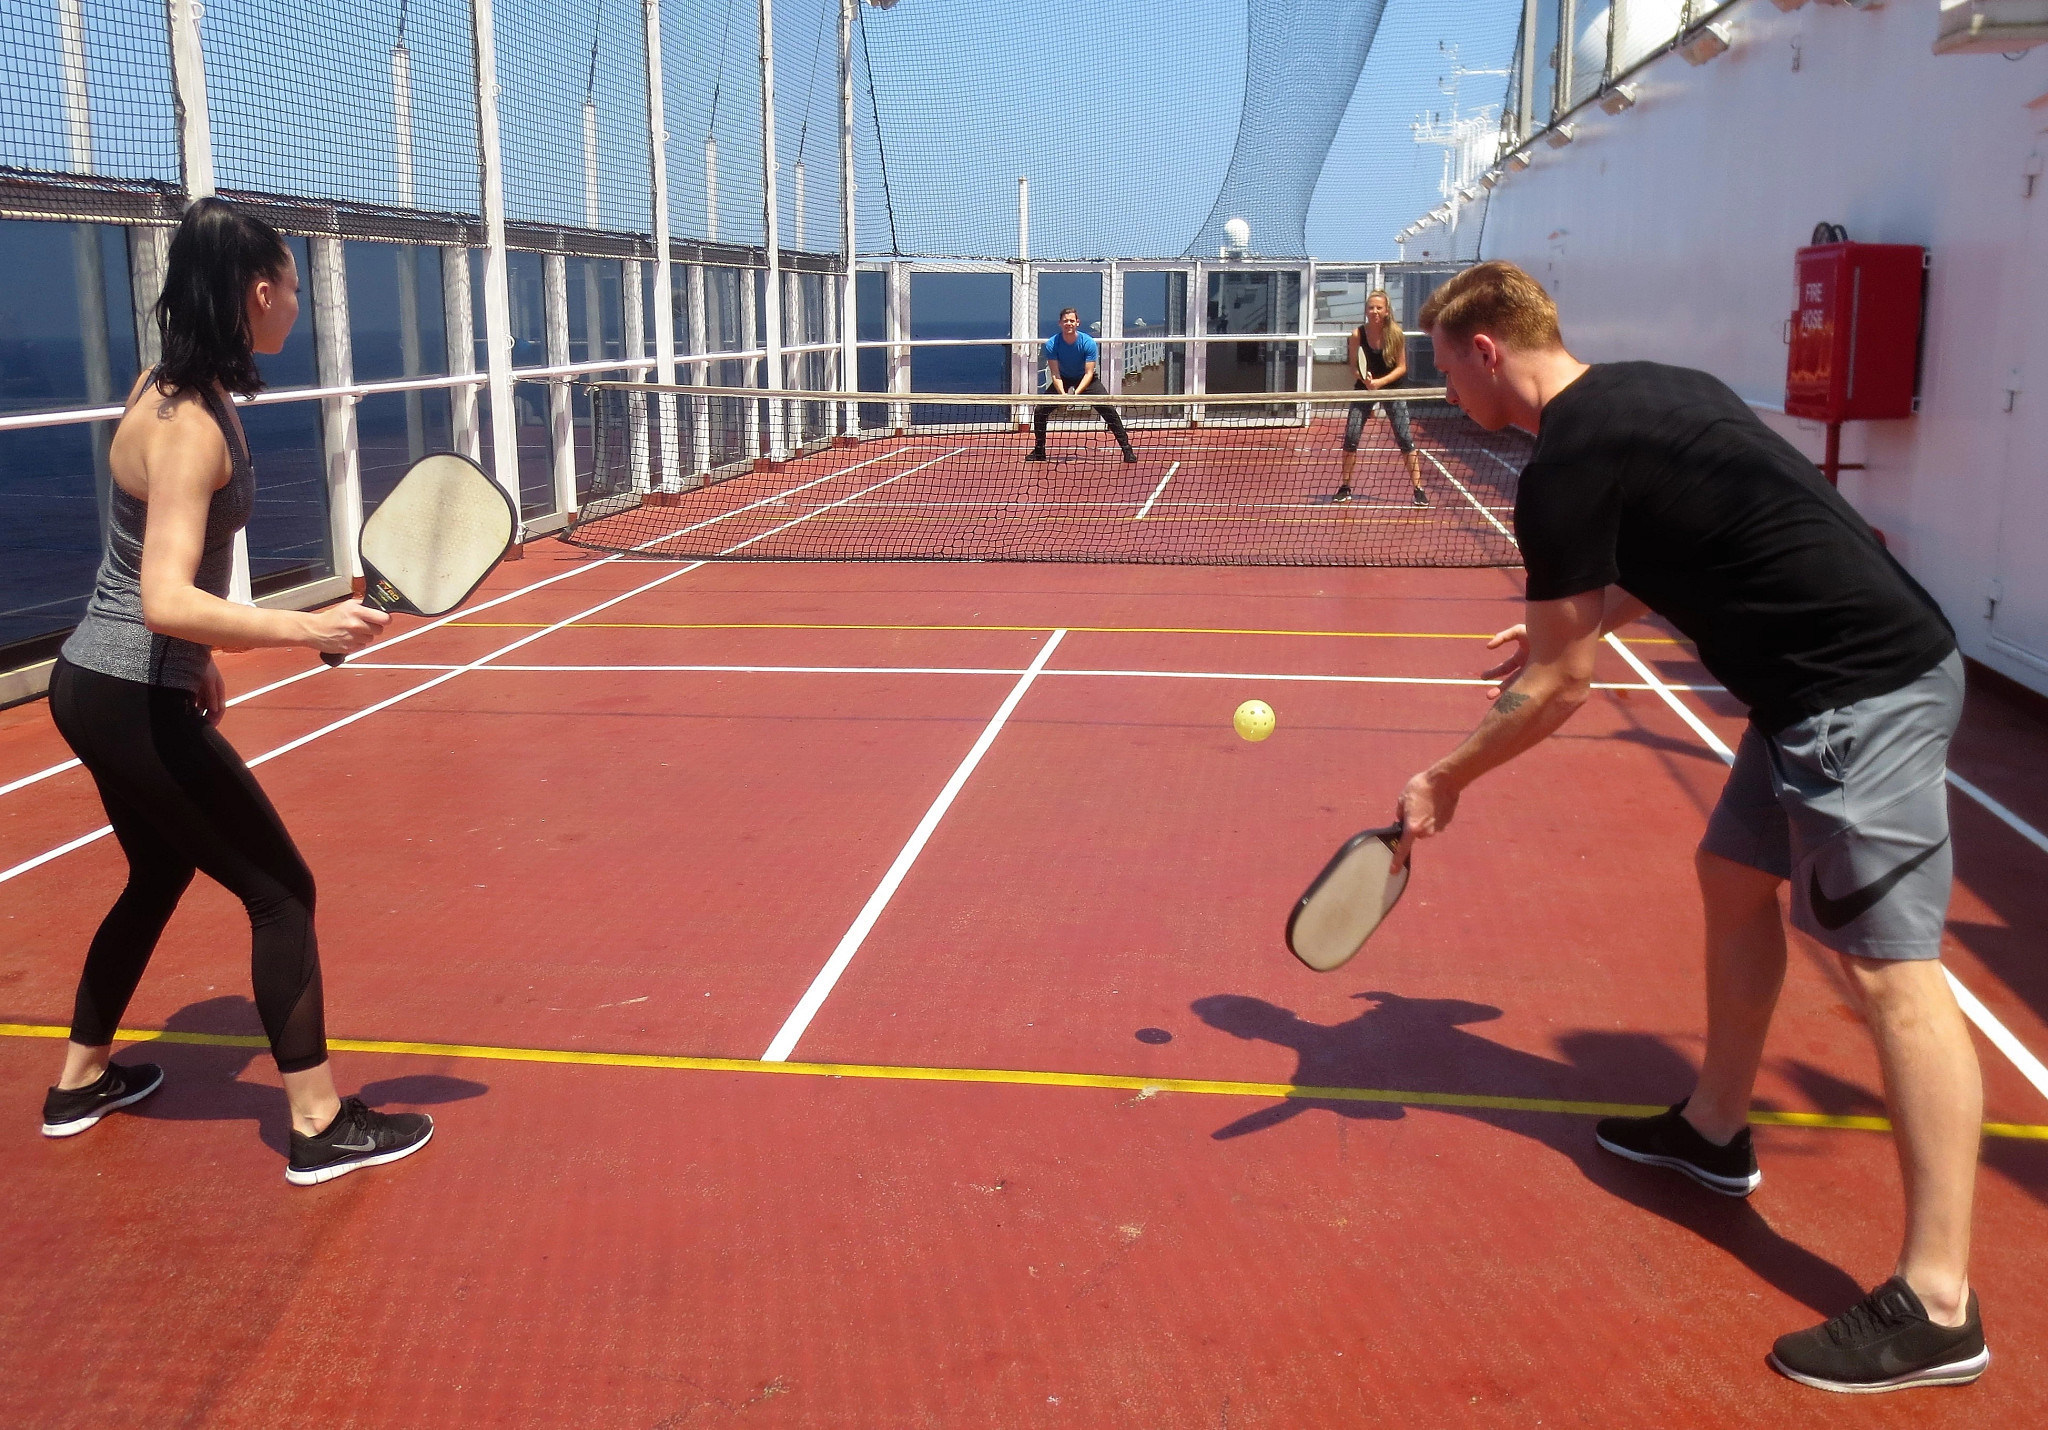 All ships in the Holland America Line fleet feature pickleball courts with amazing top-deck views that will be refreshed by February 2023, including adding new PPA Tour partner logos. Beginning in February and rolling out fleet-wide by April 2023, complimentary beginner lessons will be offered by shipboard instructors who will teach guests the rules and basics of playing pickleball, including where the  kitchen  is and what it means to hit a  dink  shot    (Image at LateCruiseNews.com - December 2022)